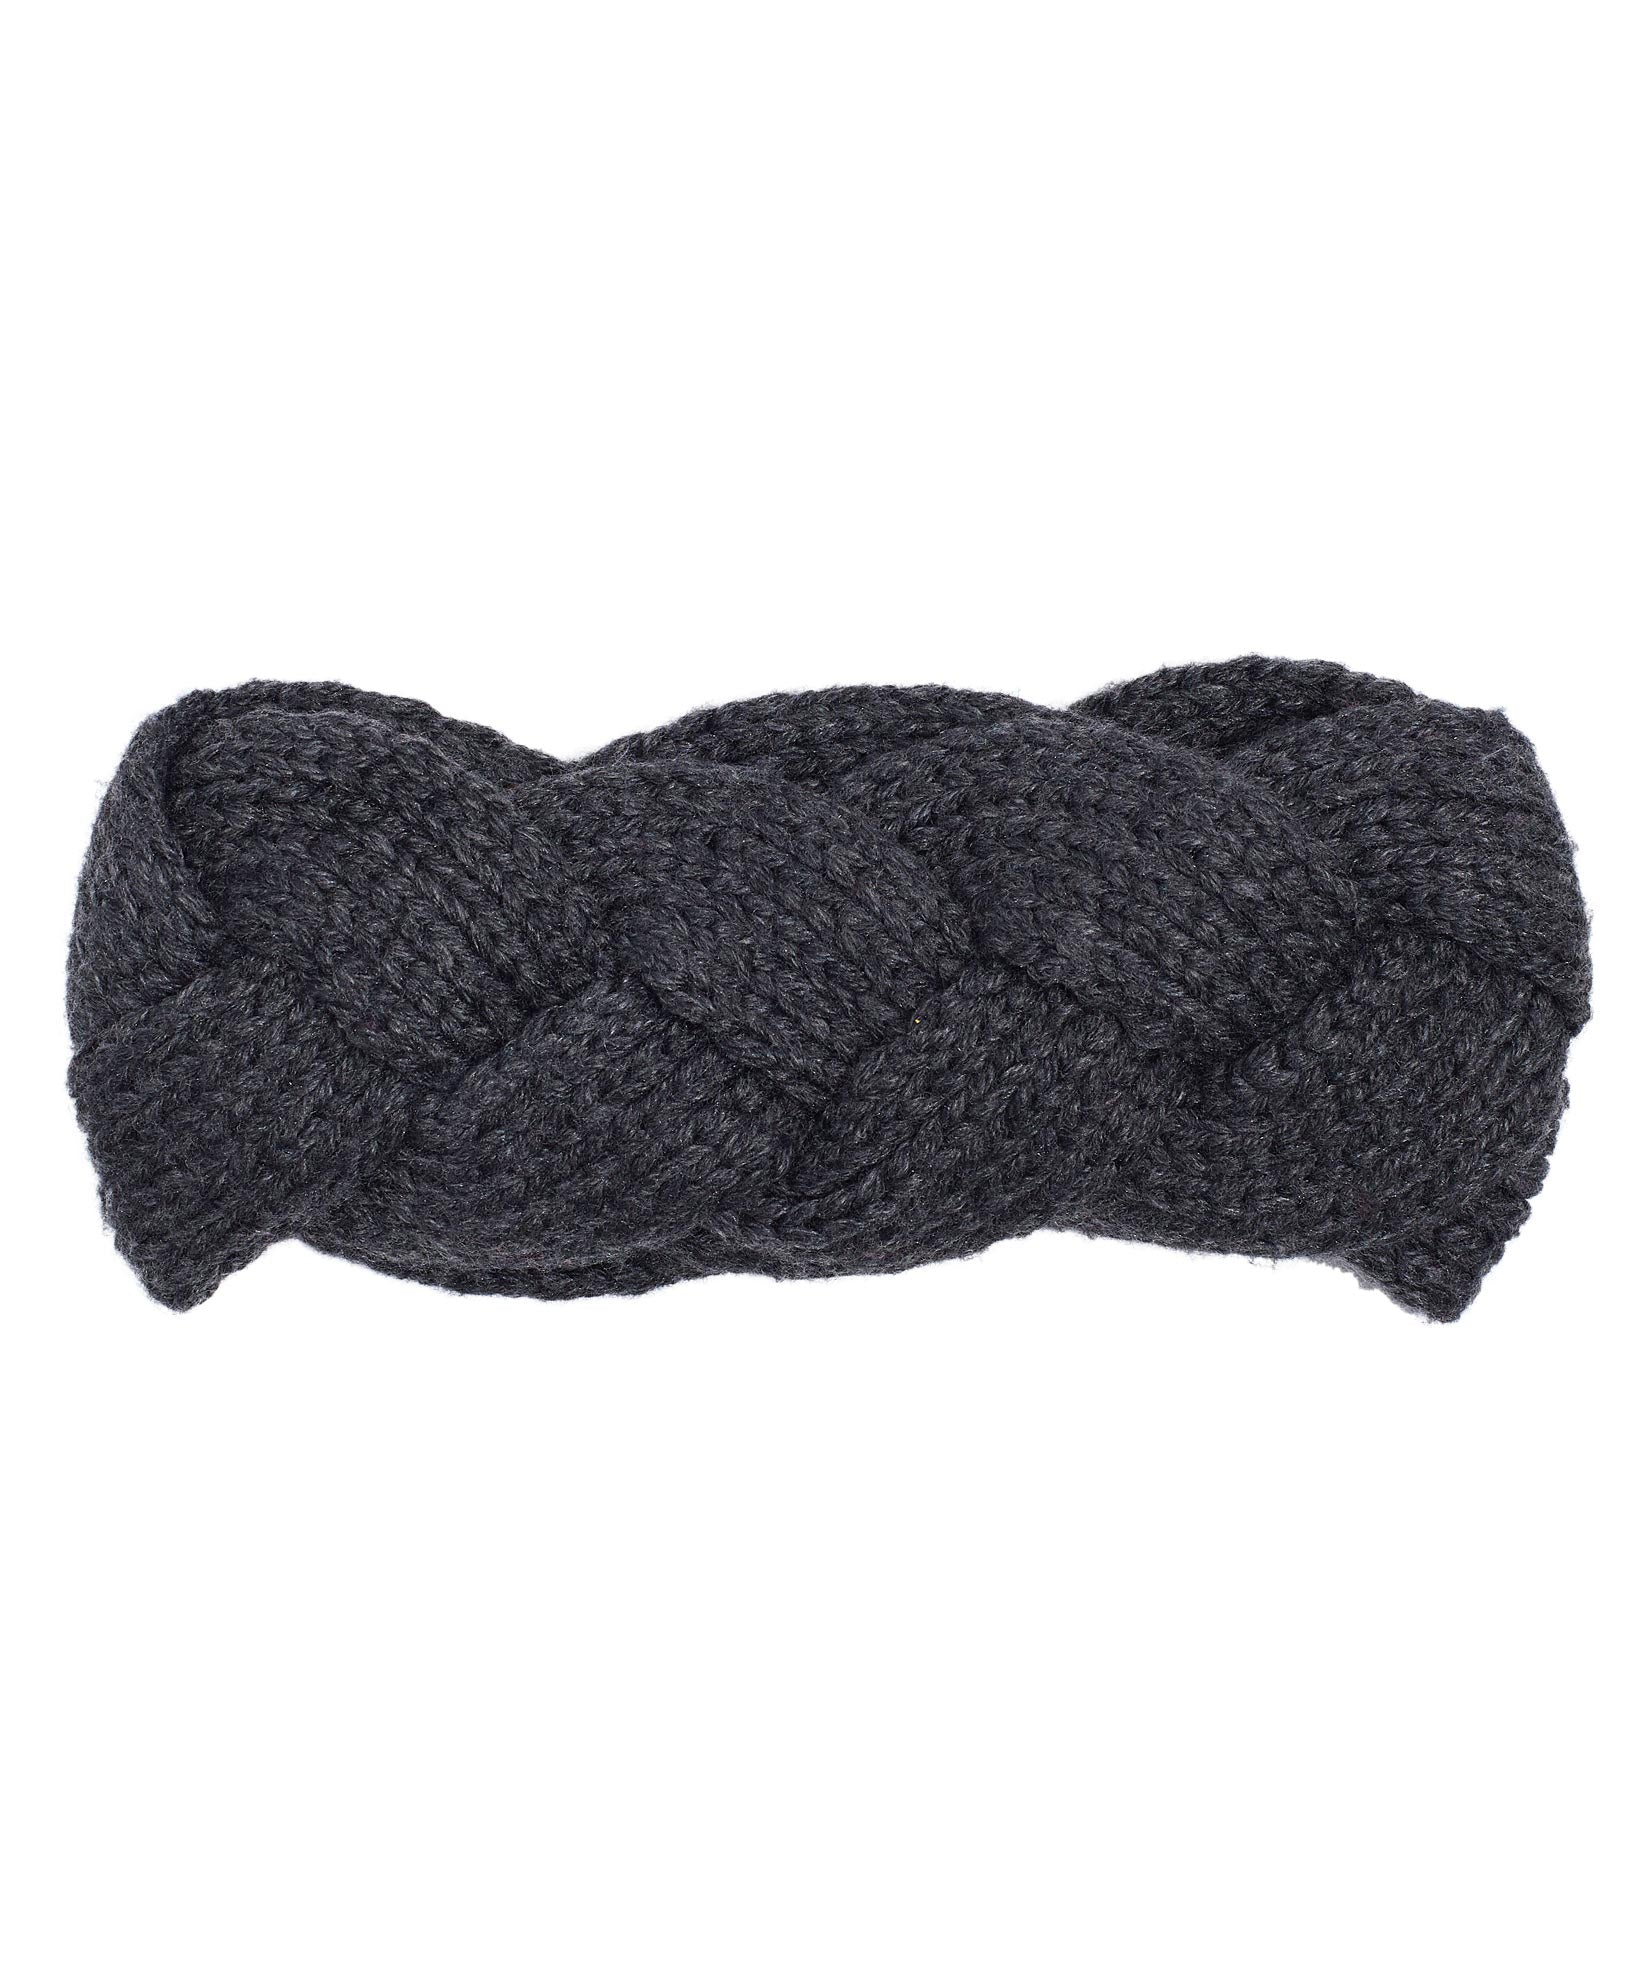 Recycled Cable Headband in color Charcoal